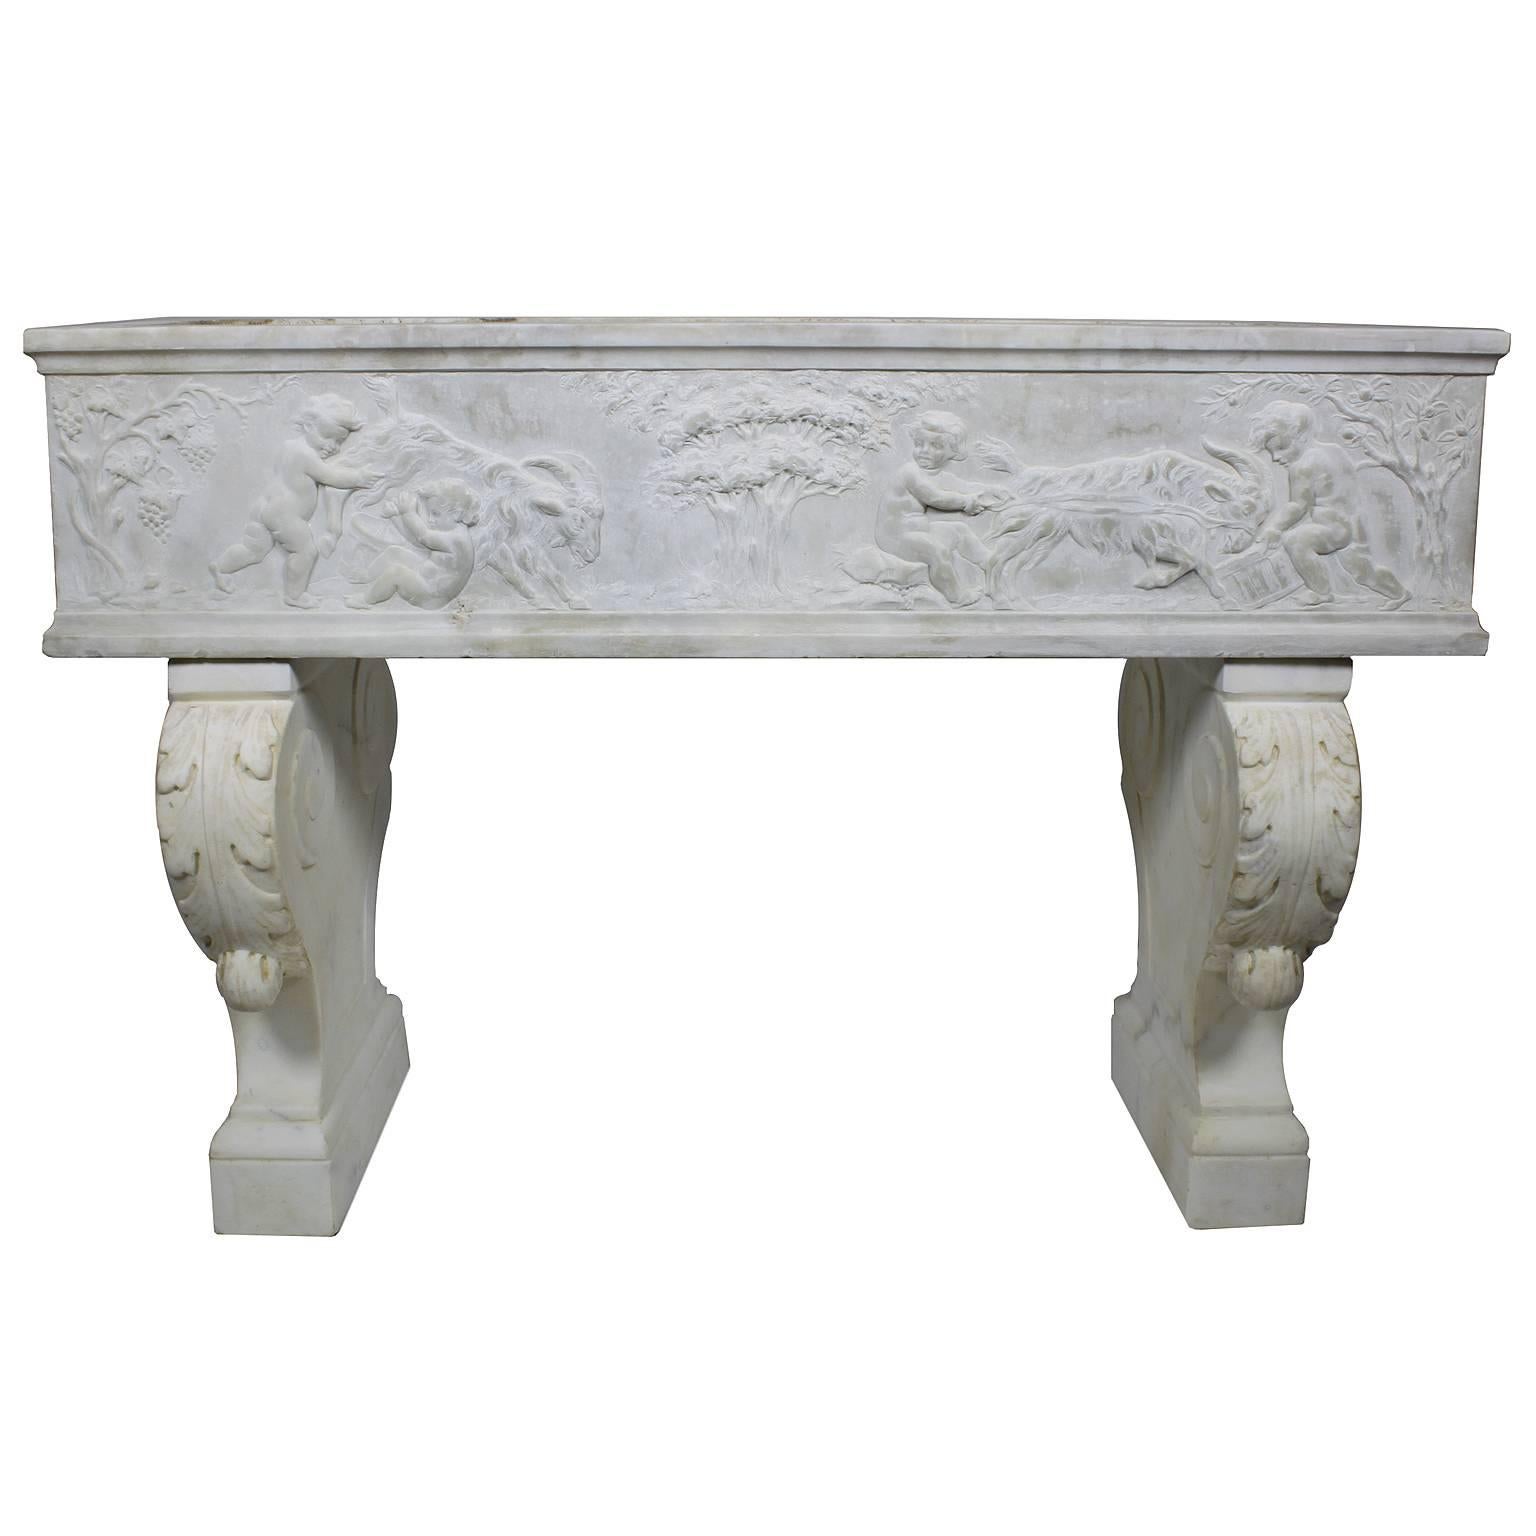 A fine French 19th century whimsical Rococo style white marble carved planter jardinière with figures of playful Putti 'Children' playing with a goats among trees and vines, raised on twin pedestal stands with acanthus leaves, Paris, circa